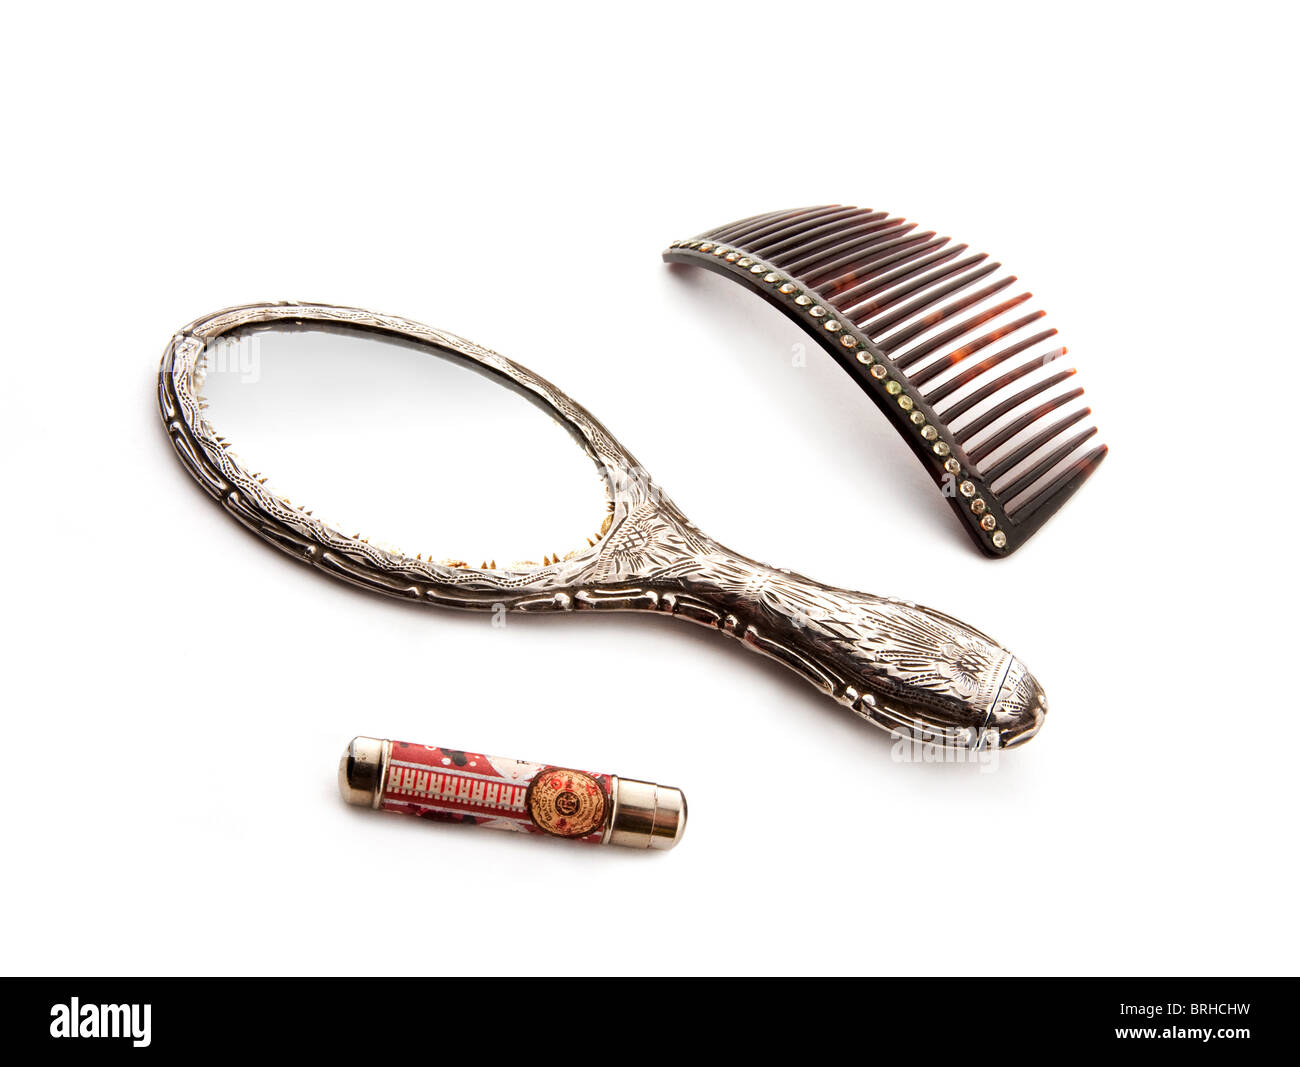 Vintage make-up accessories Stock Photo